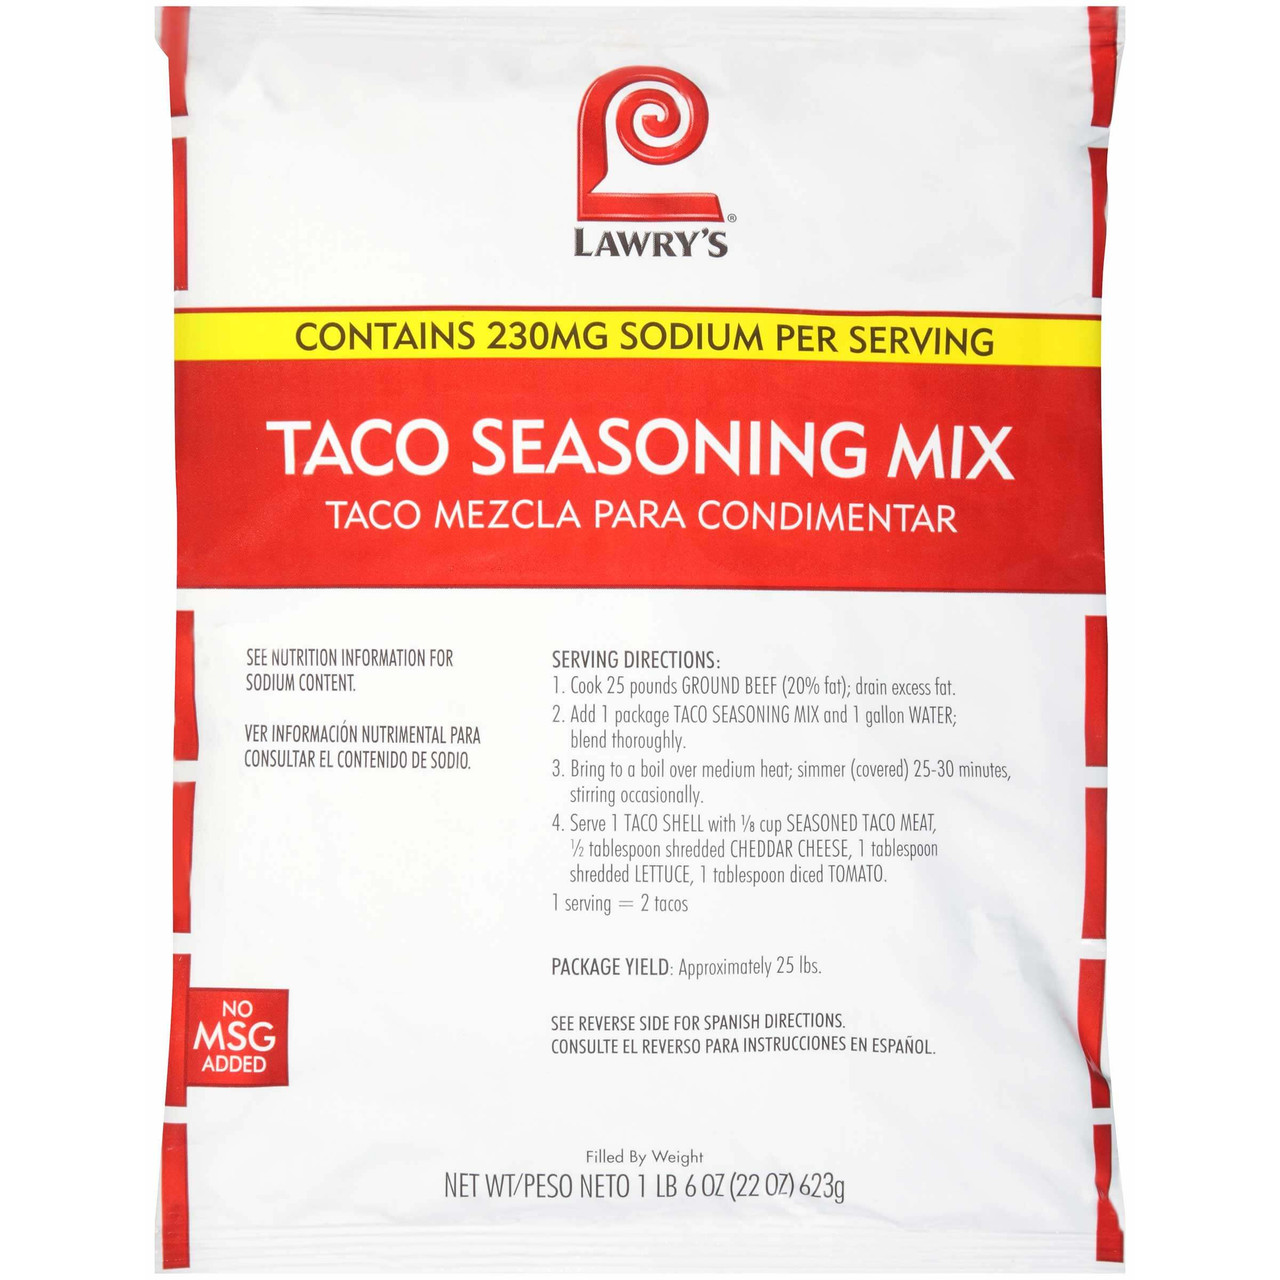 Lawry's Taco Seasoning Mix, 22 oz. 6/Case - Authentic Blend for Flavorful Tacos - Chicken Pieces